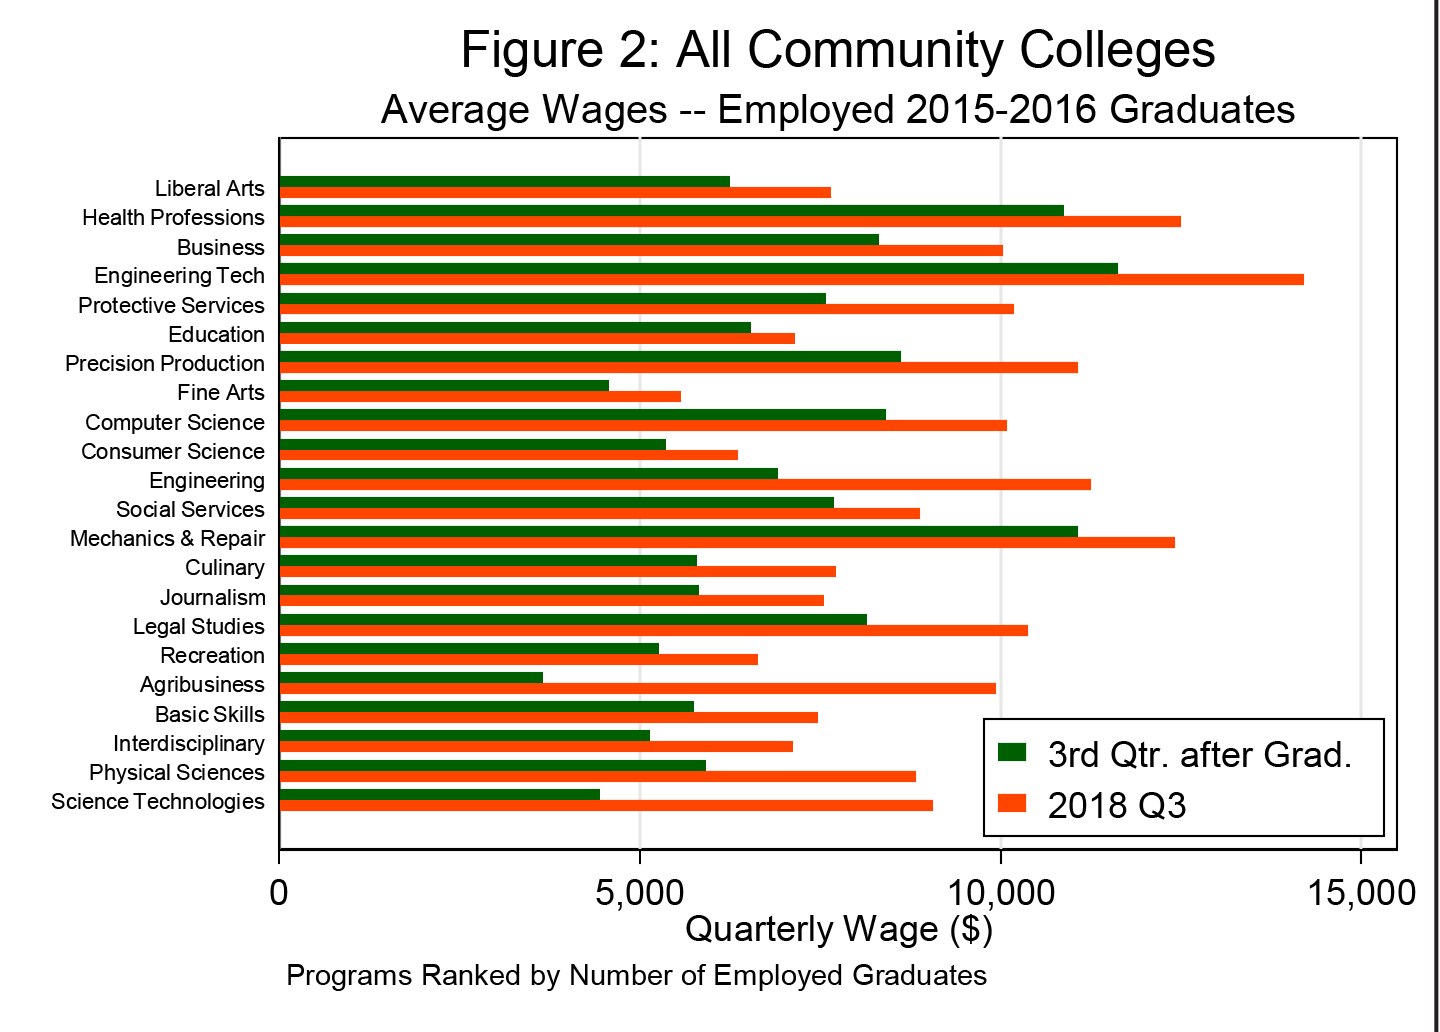 Figure 2: All Community Colleges Average Wages - Employed 2015-2016 Graduates